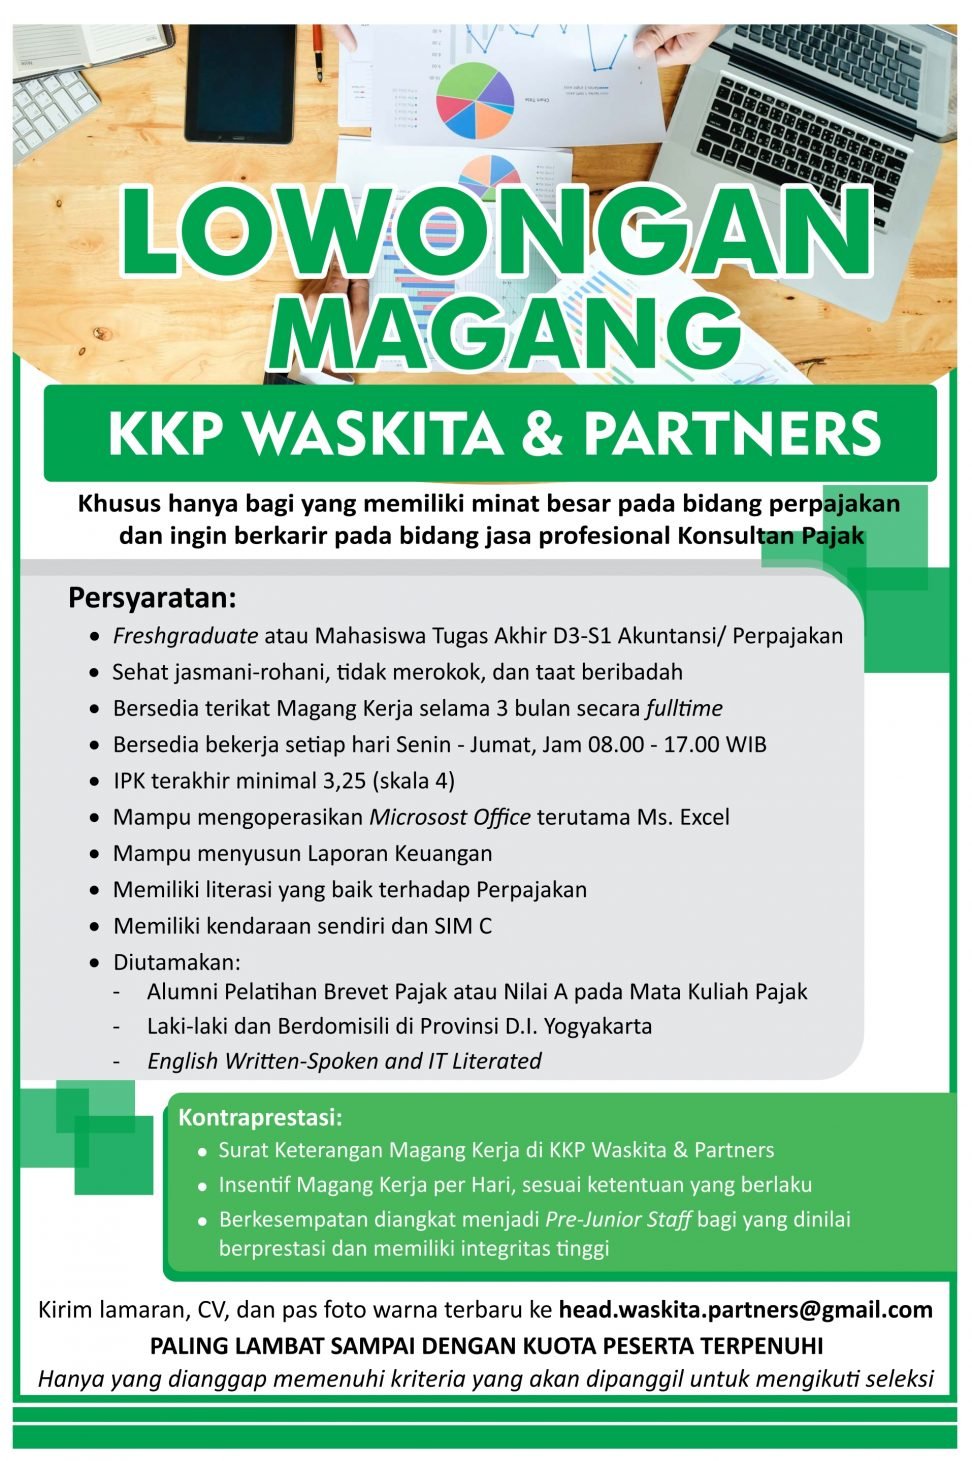 Lowongan Magang 2023 W A S K I T A And Partners